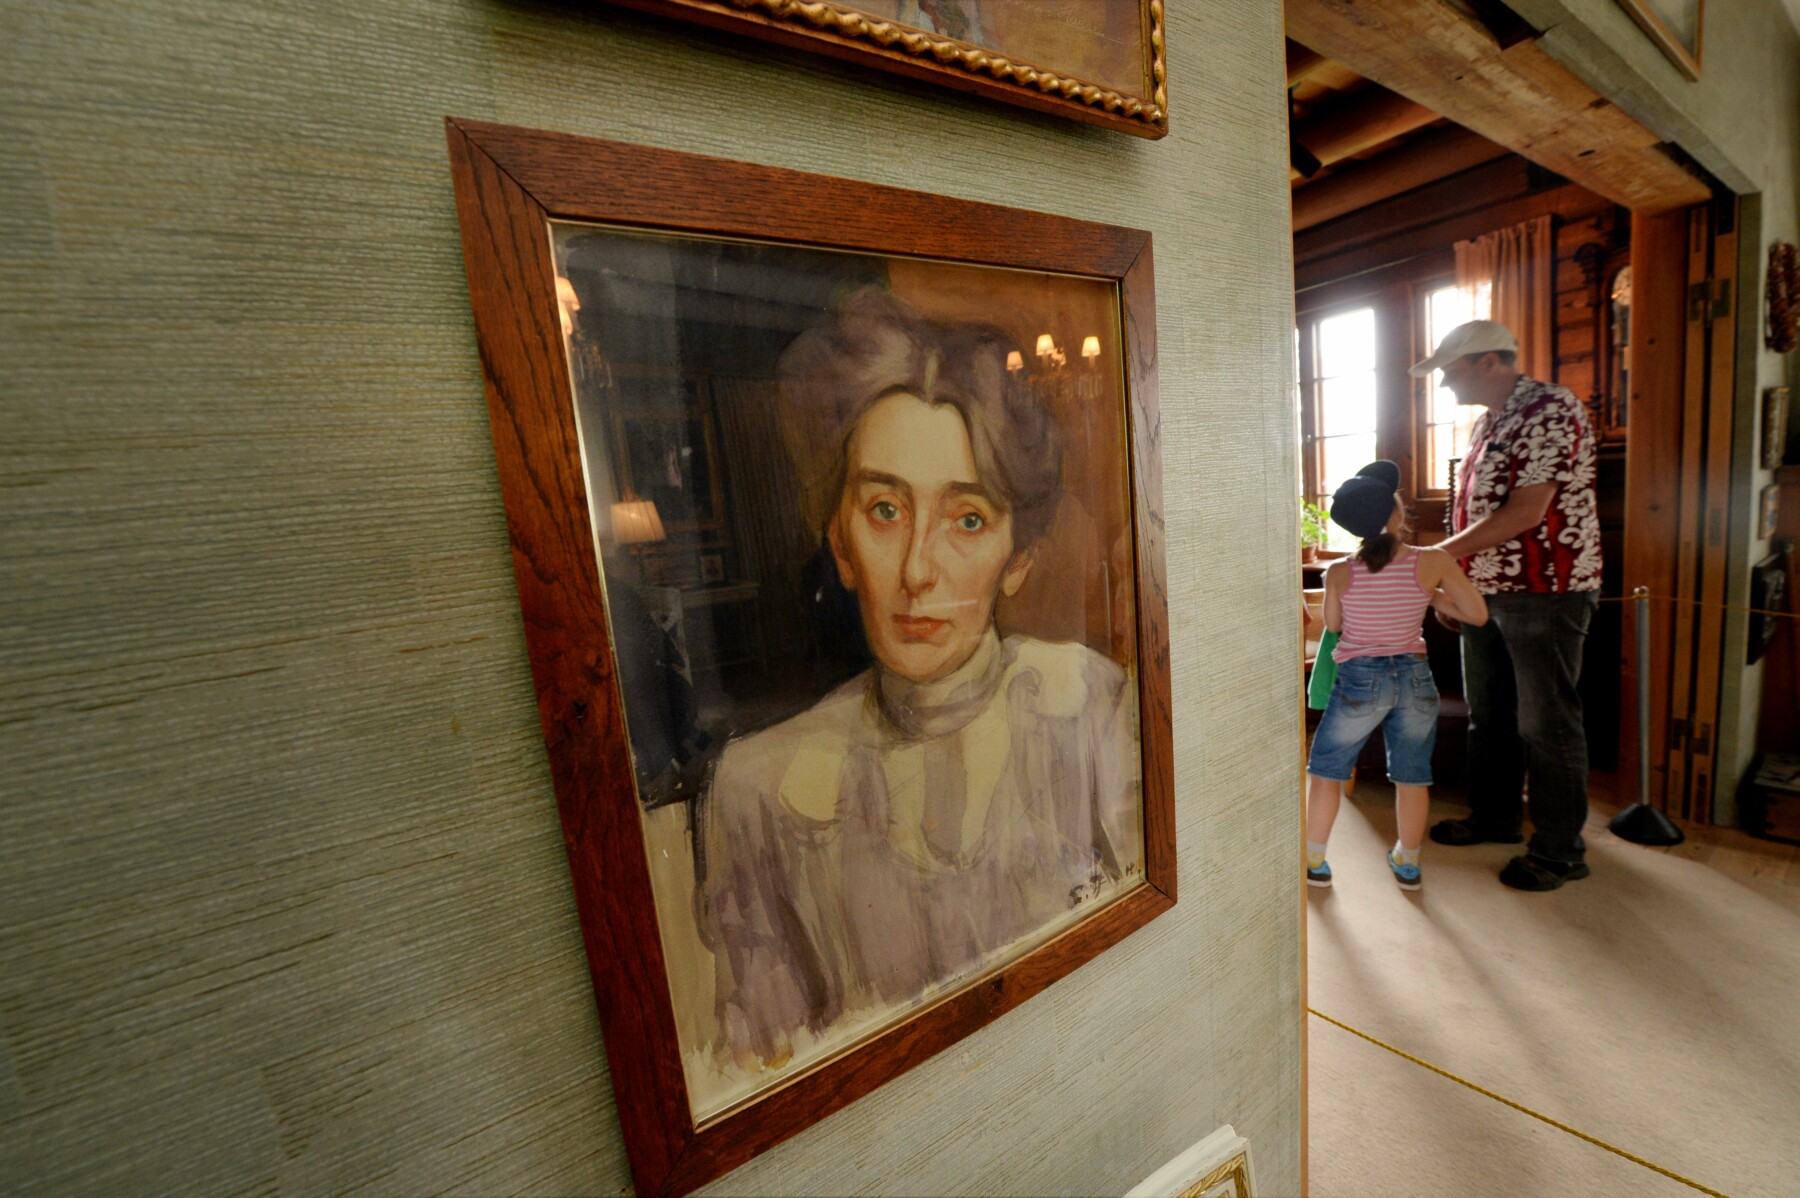 A painting hanging in a house shows a woman’s face and shoulders.